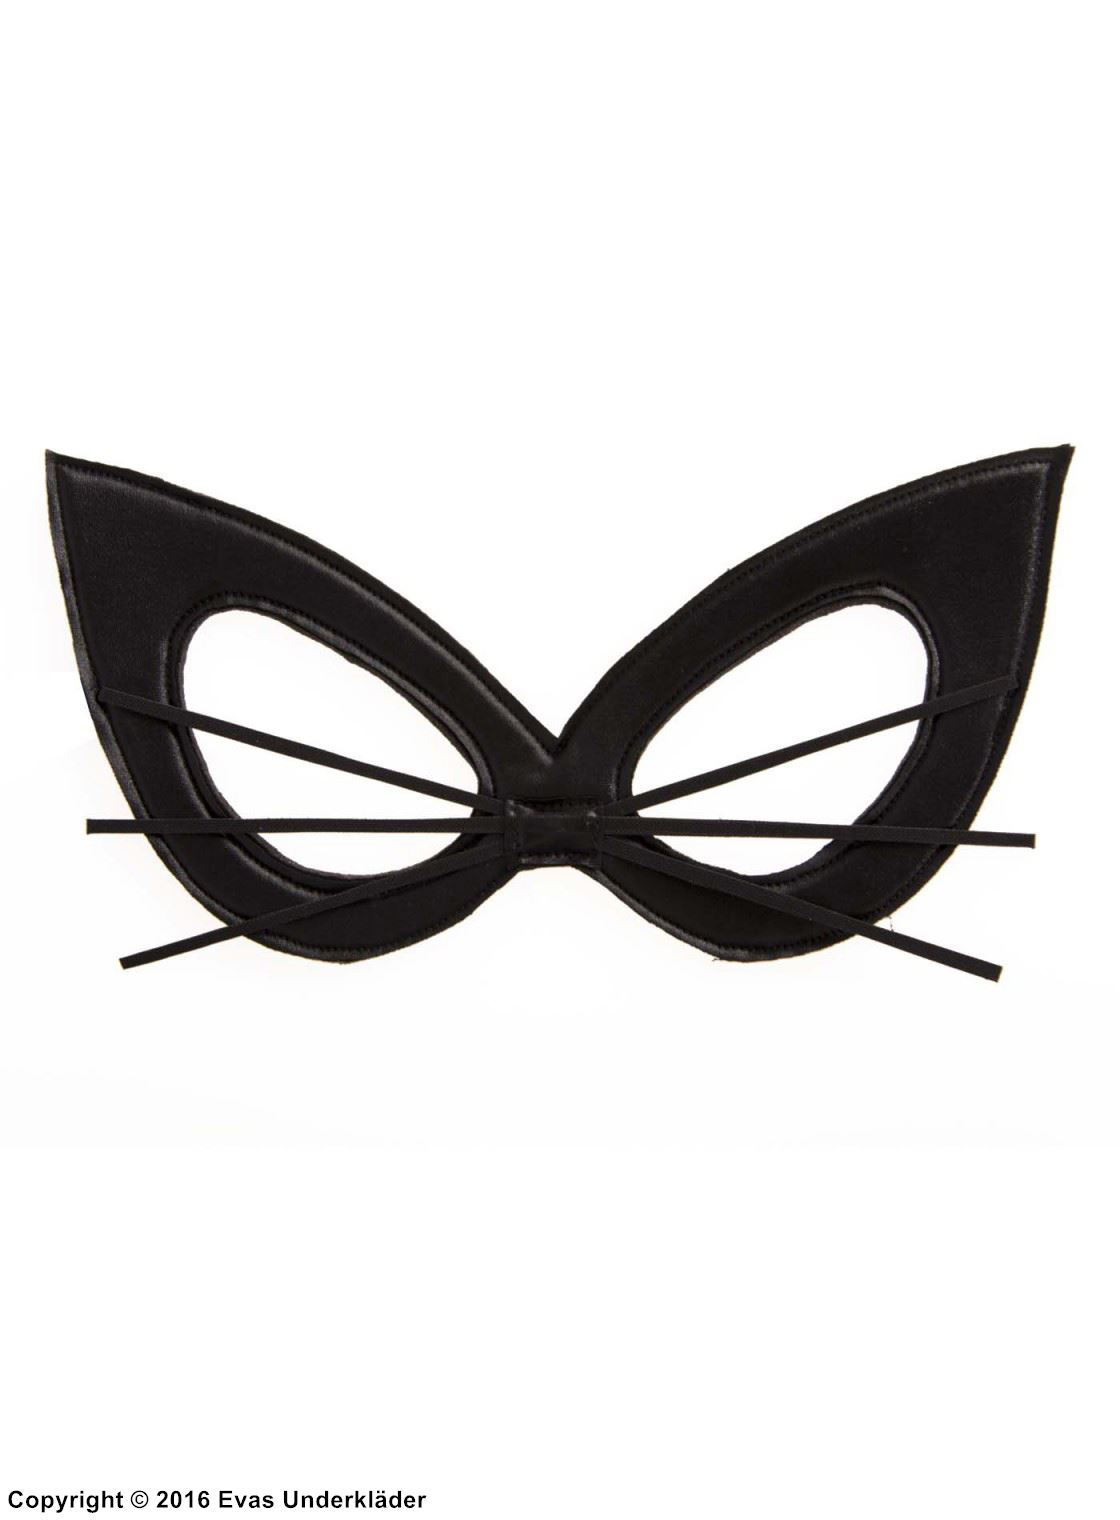 Bunny (woman), costume mask, whiskers